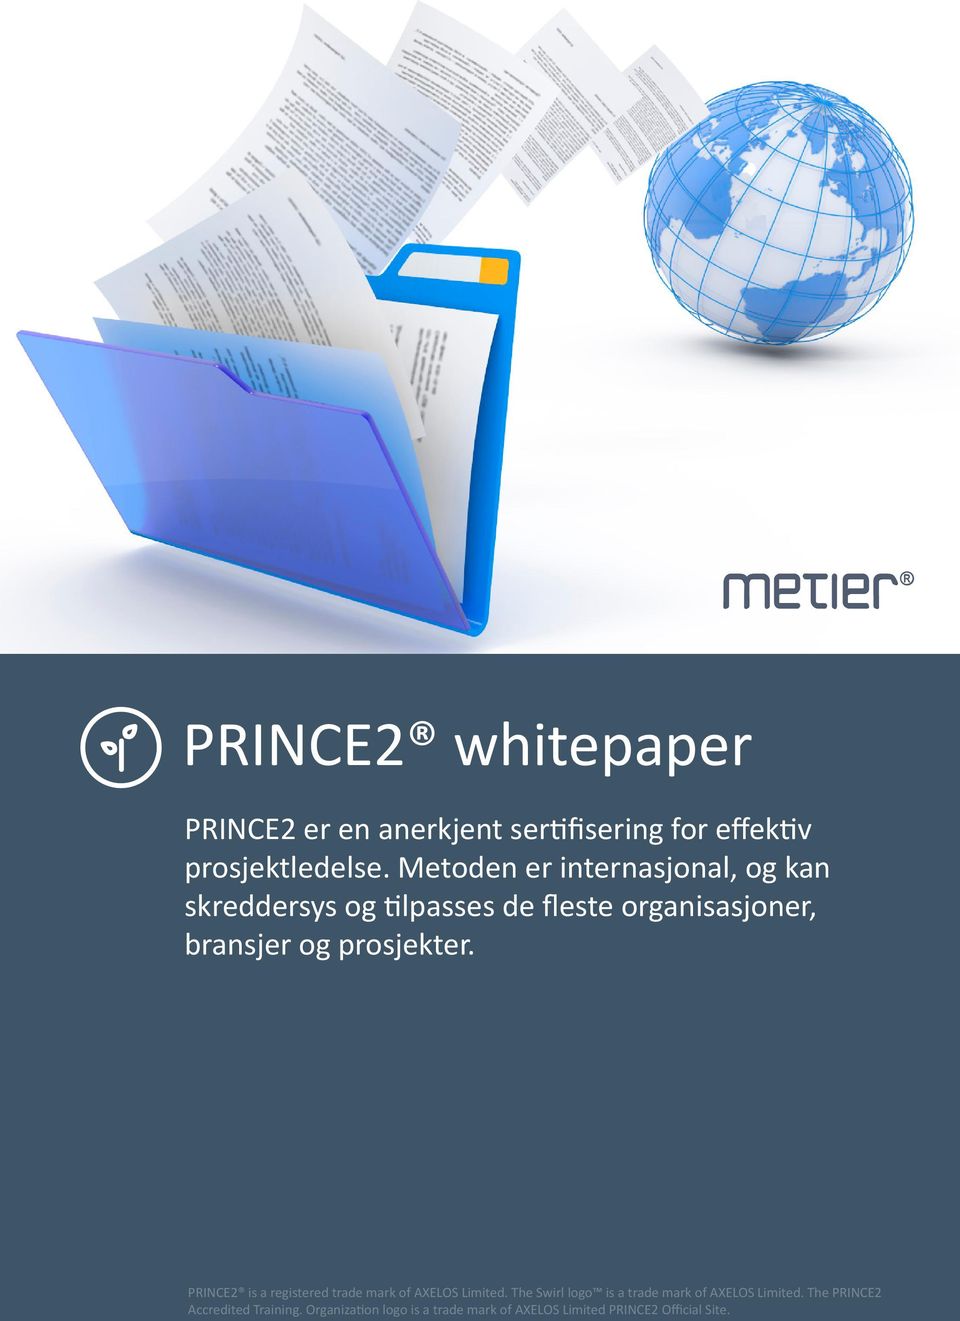 prosjekter. PRINCE2 is a registered trade mark of AXELOS Limited.